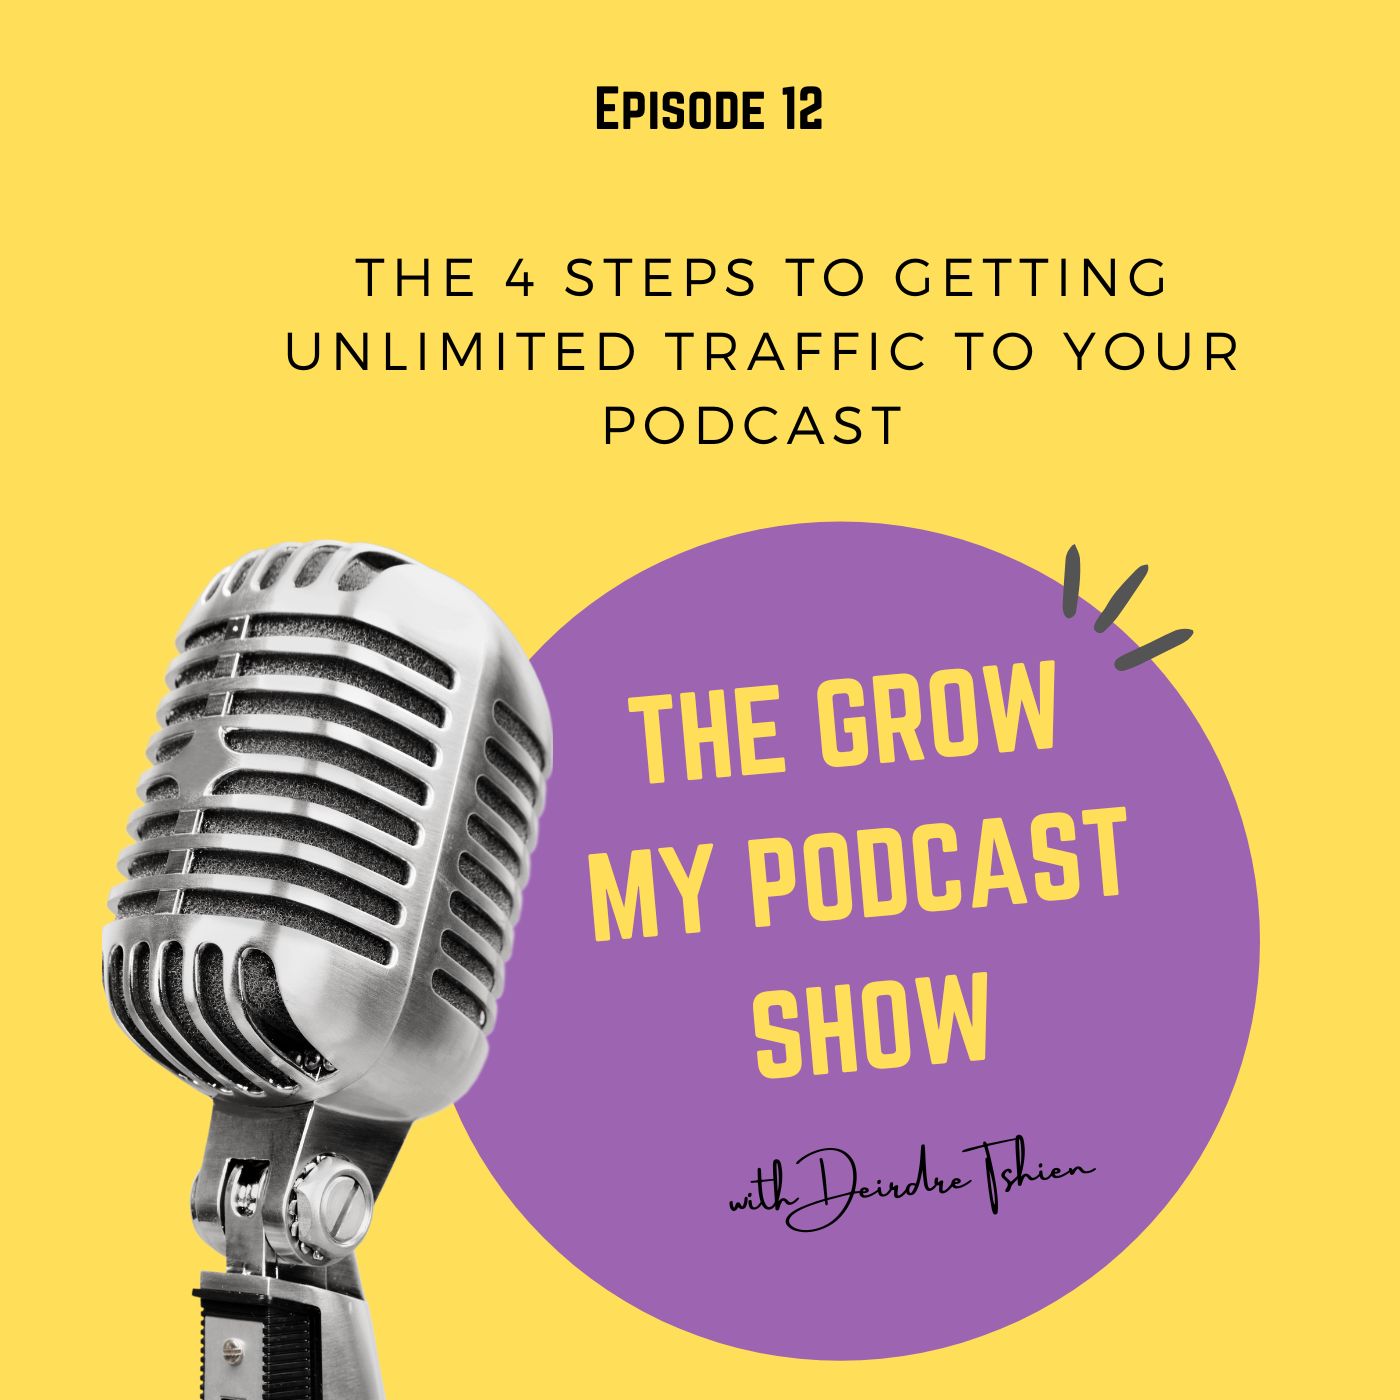 The 4 Steps To Getting Unlimited Traffic To Your Podcast